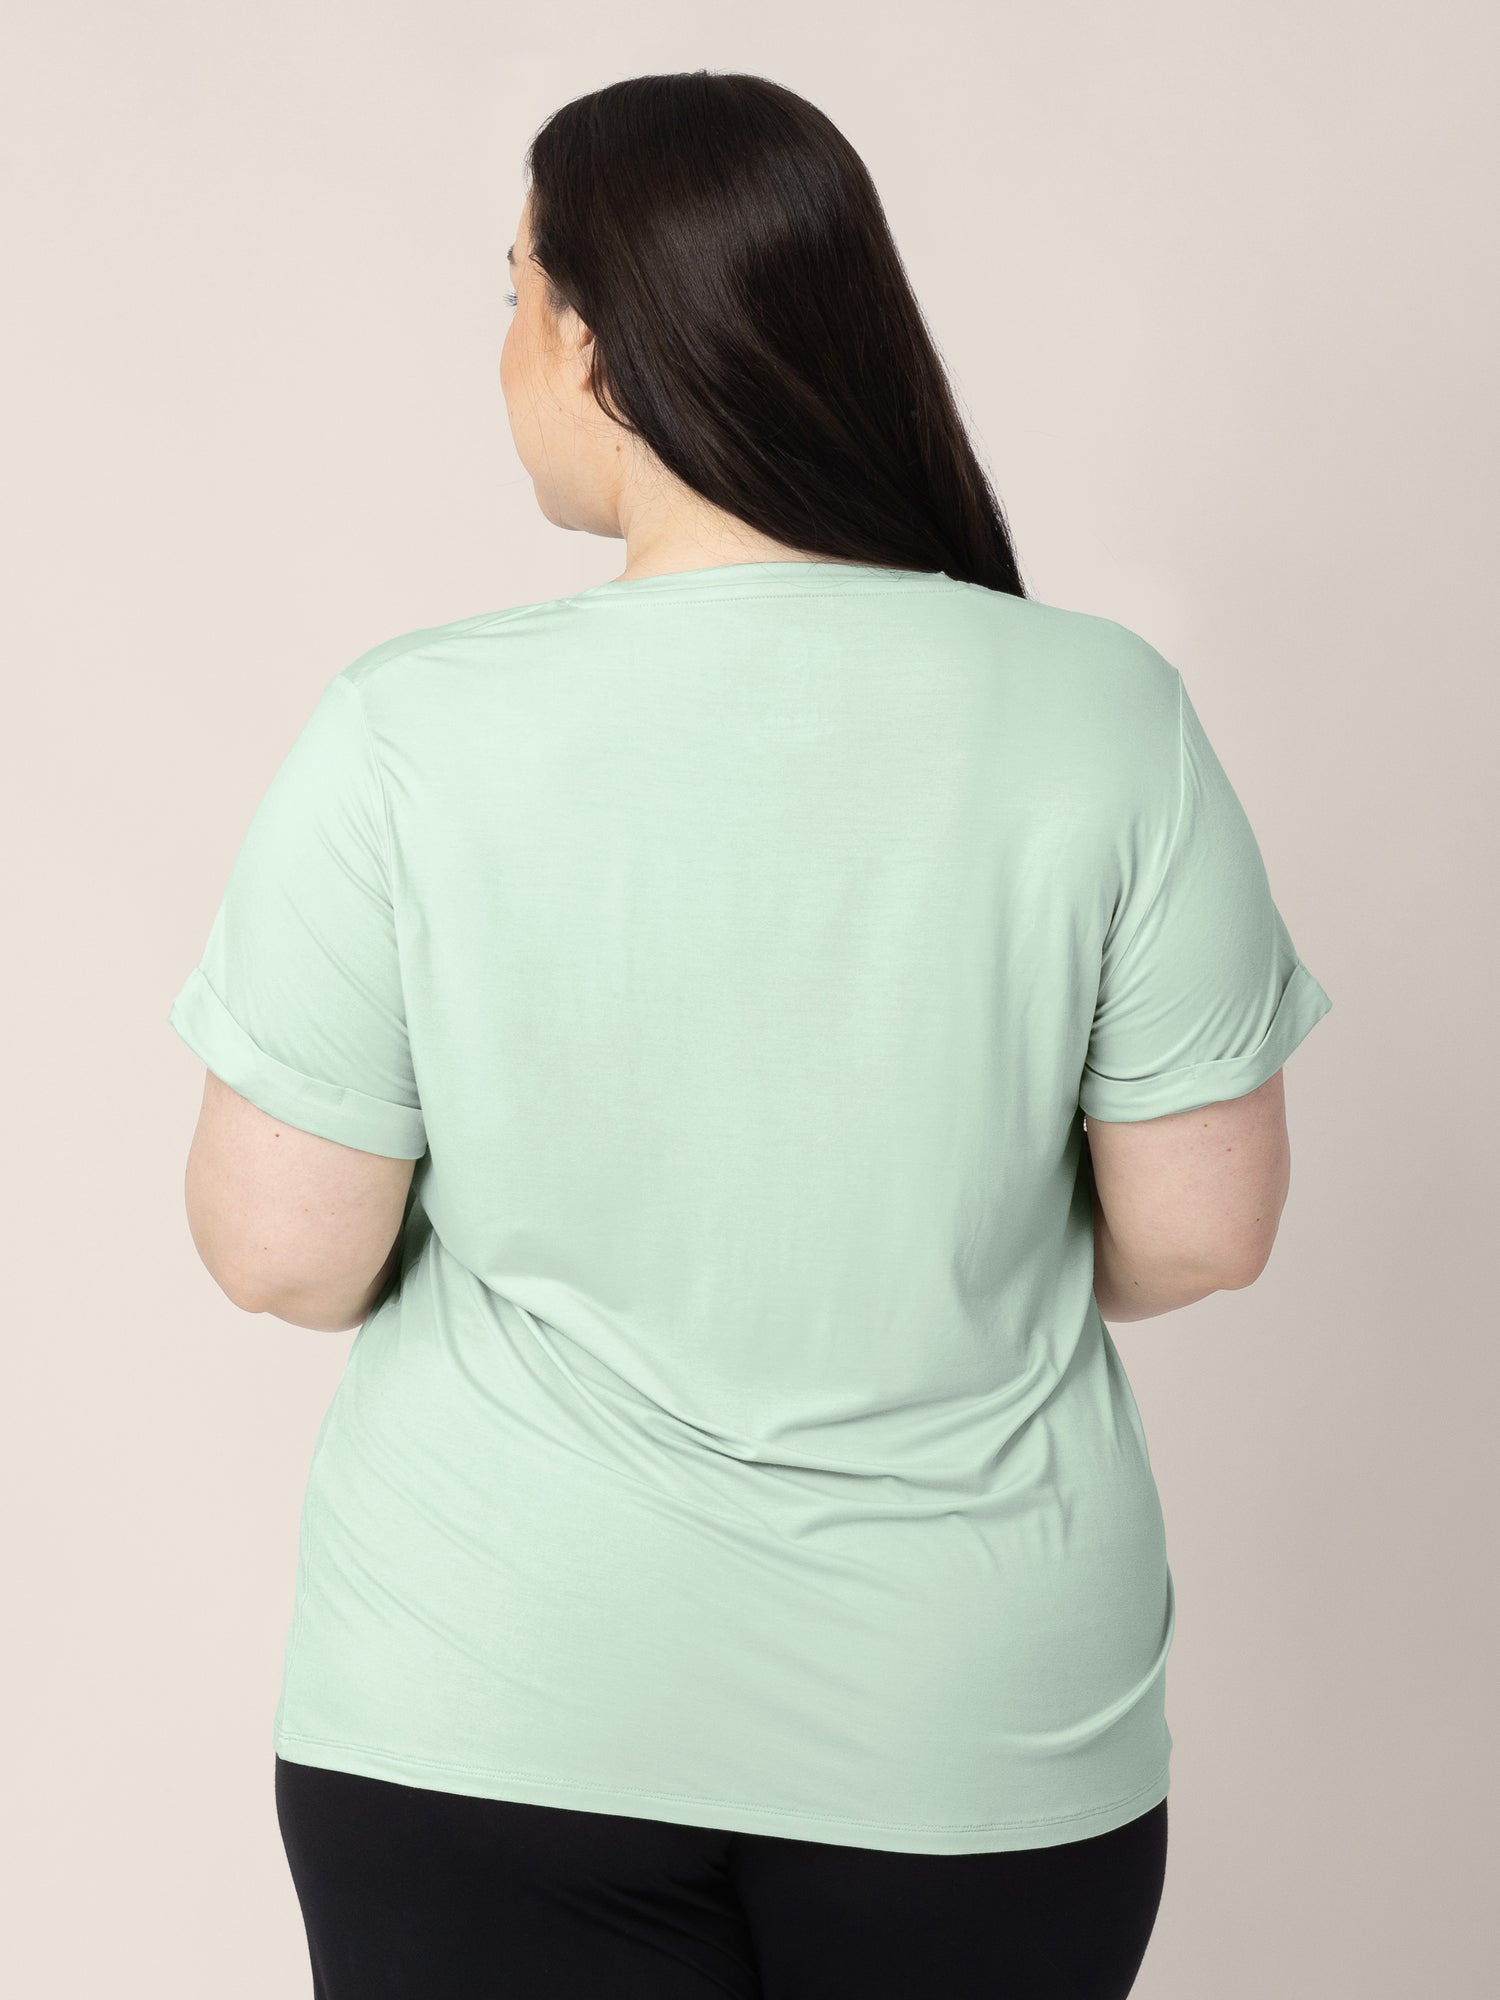 The back of a model wearing the Everyday Asymmetrical Nursing T-shirt in Soft Mint.